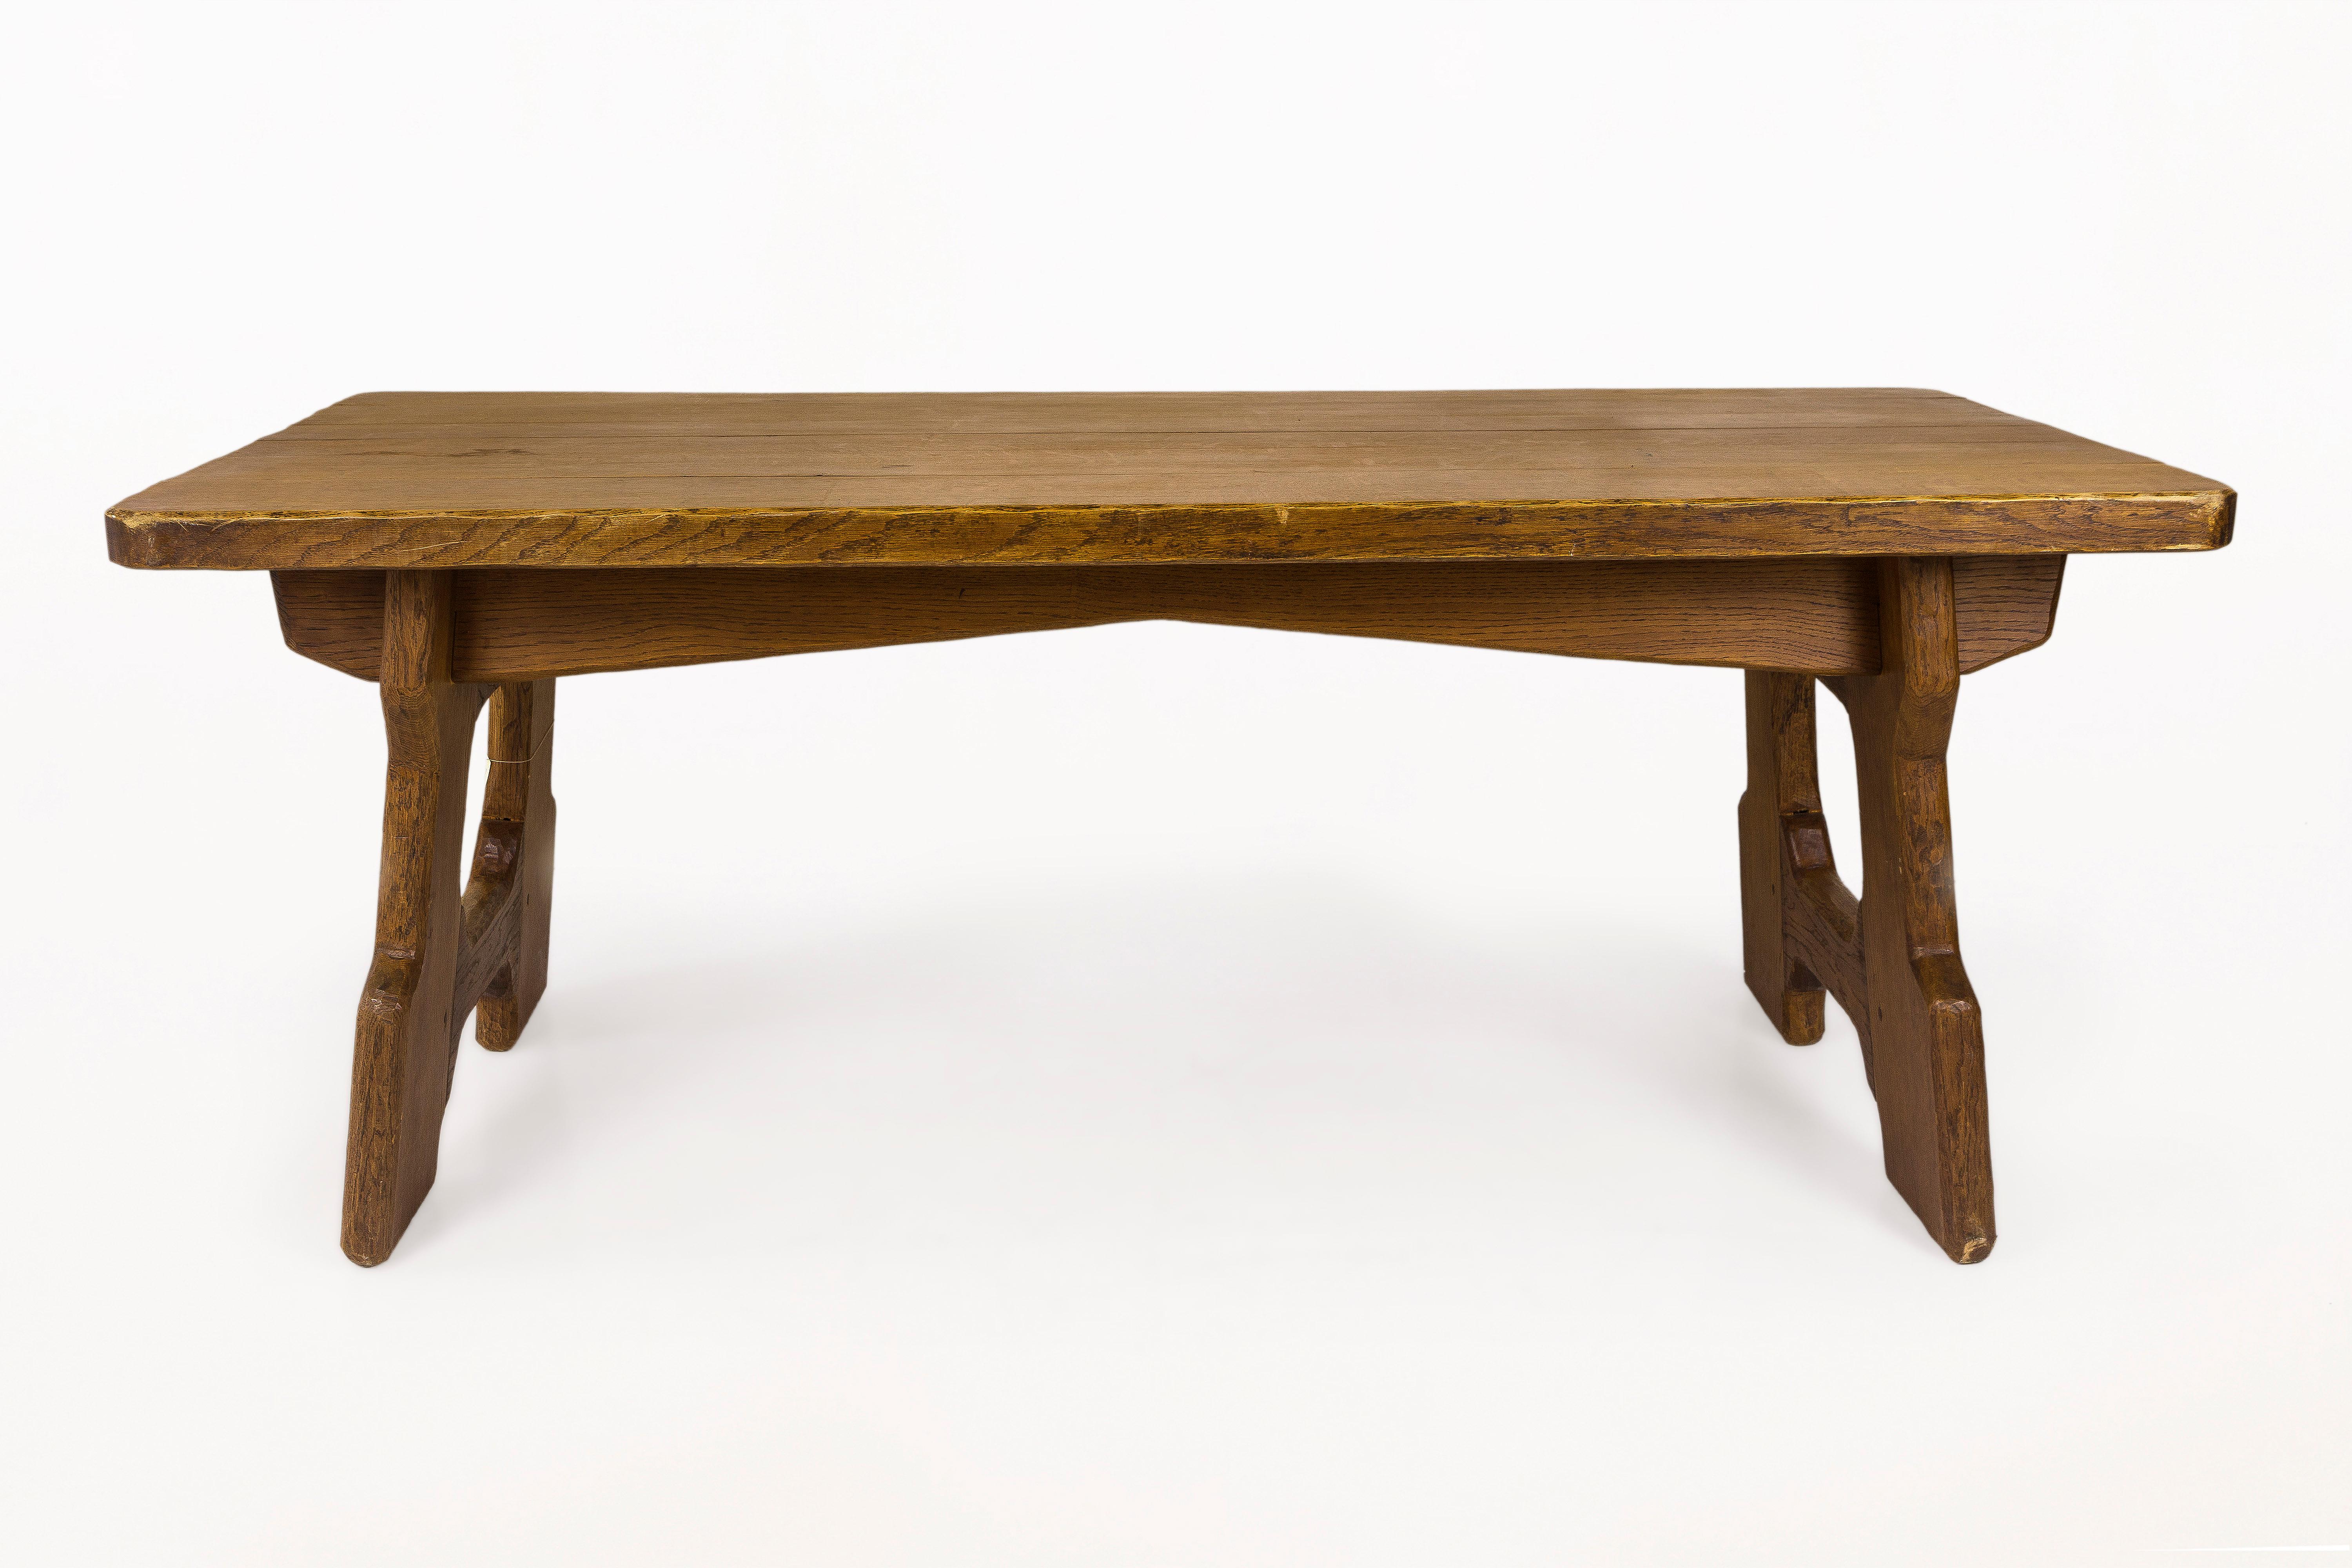 Oak dining table
In the style of Atelier de Marolles,
circa 1960, France
Good vintage condition.